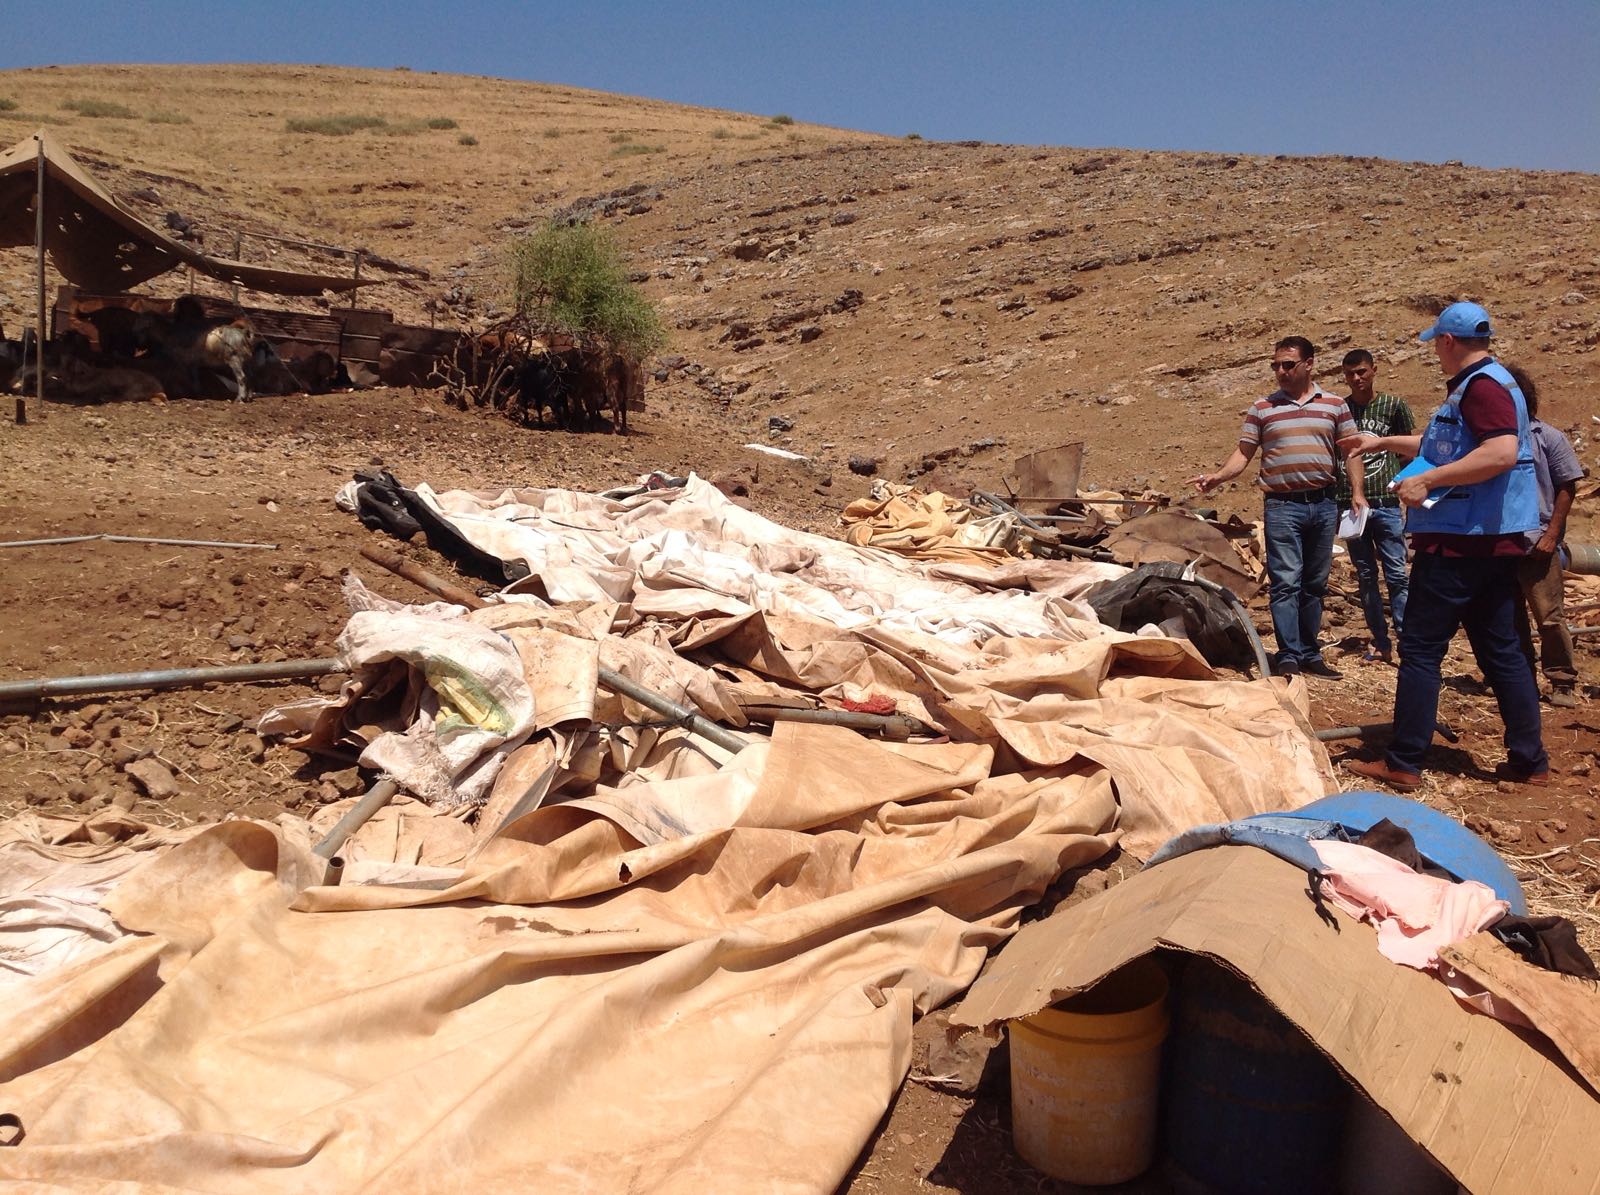 Needs assessment ongoing following a demolition in the Khirbet ar Ras al Ahmar community in the Northern Jordan Valley, 30 July, 2019. ©  Photo by OCHA